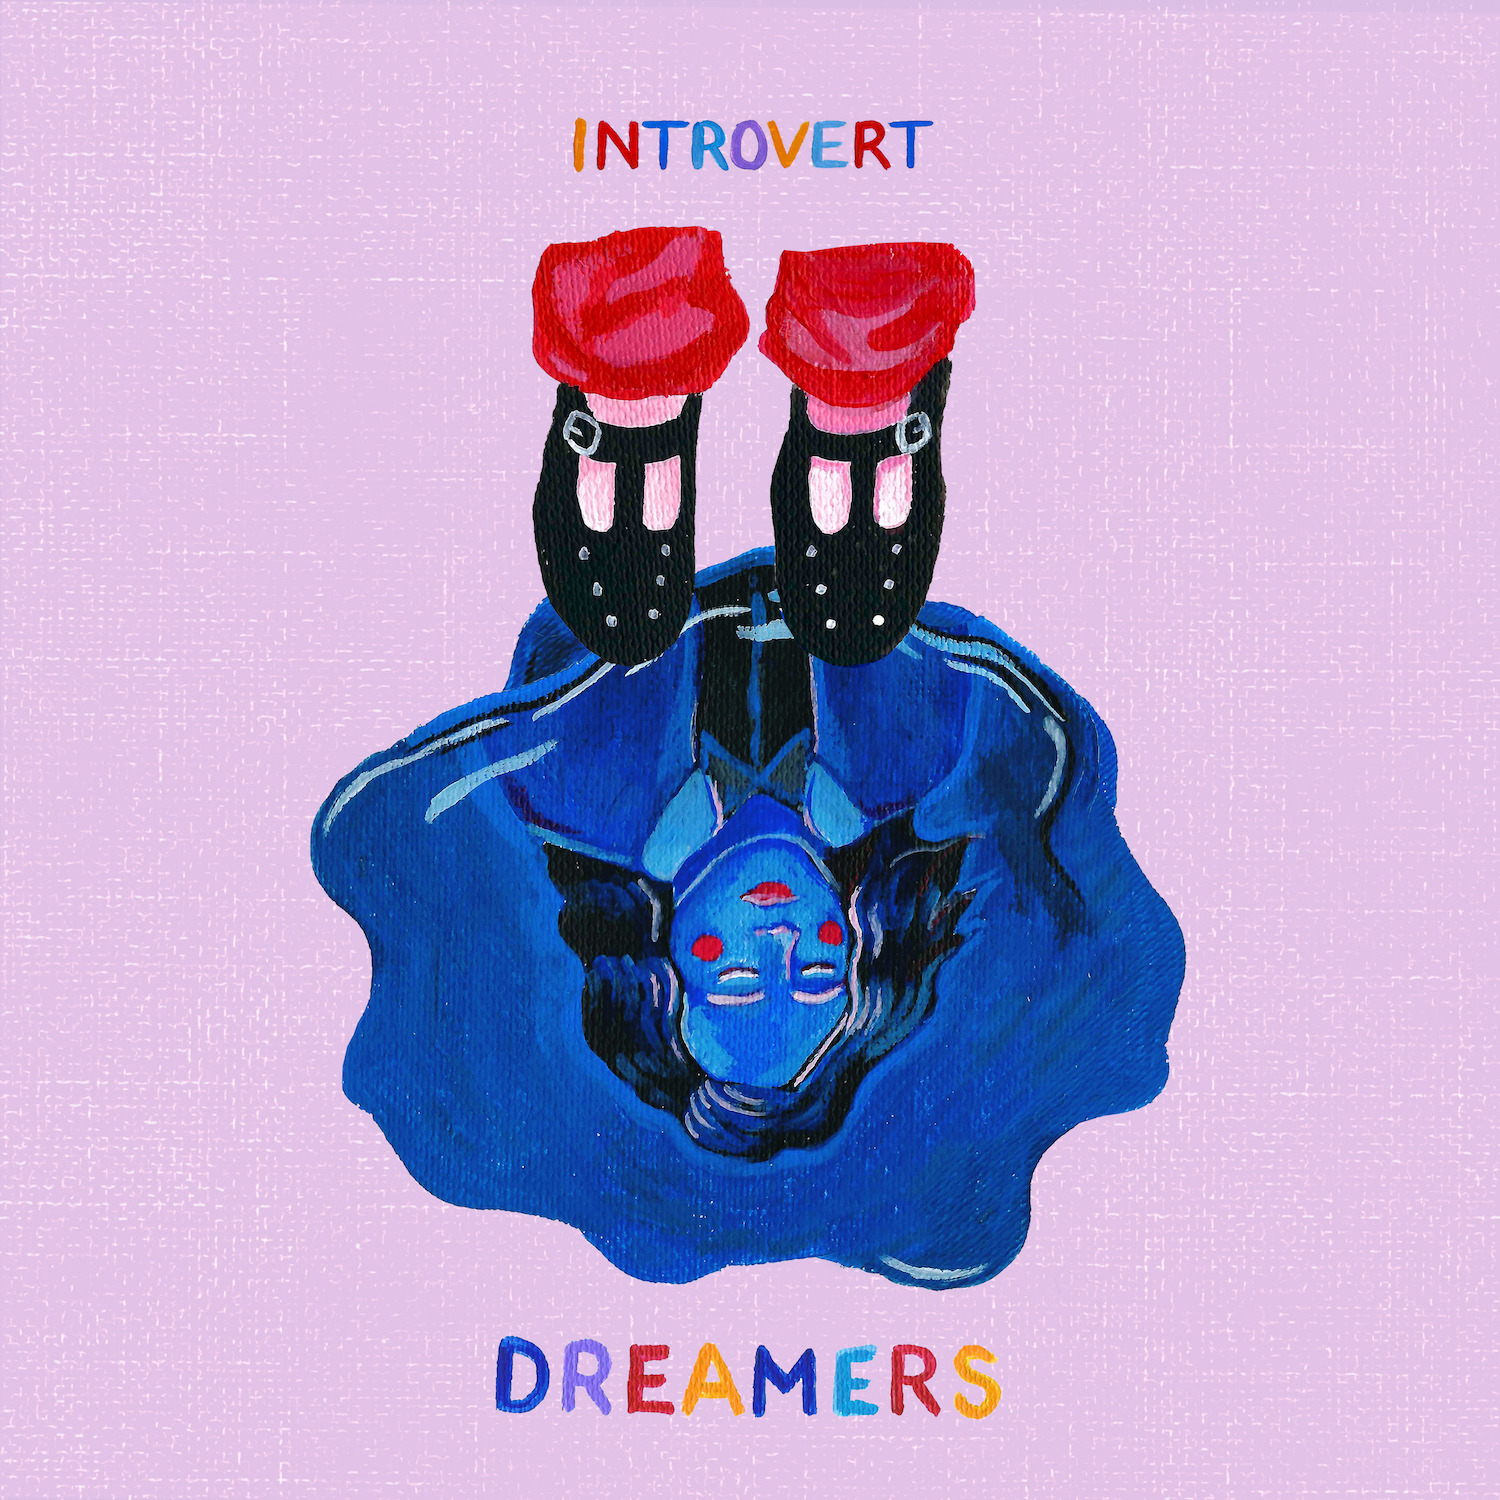 Introvert Dreamers